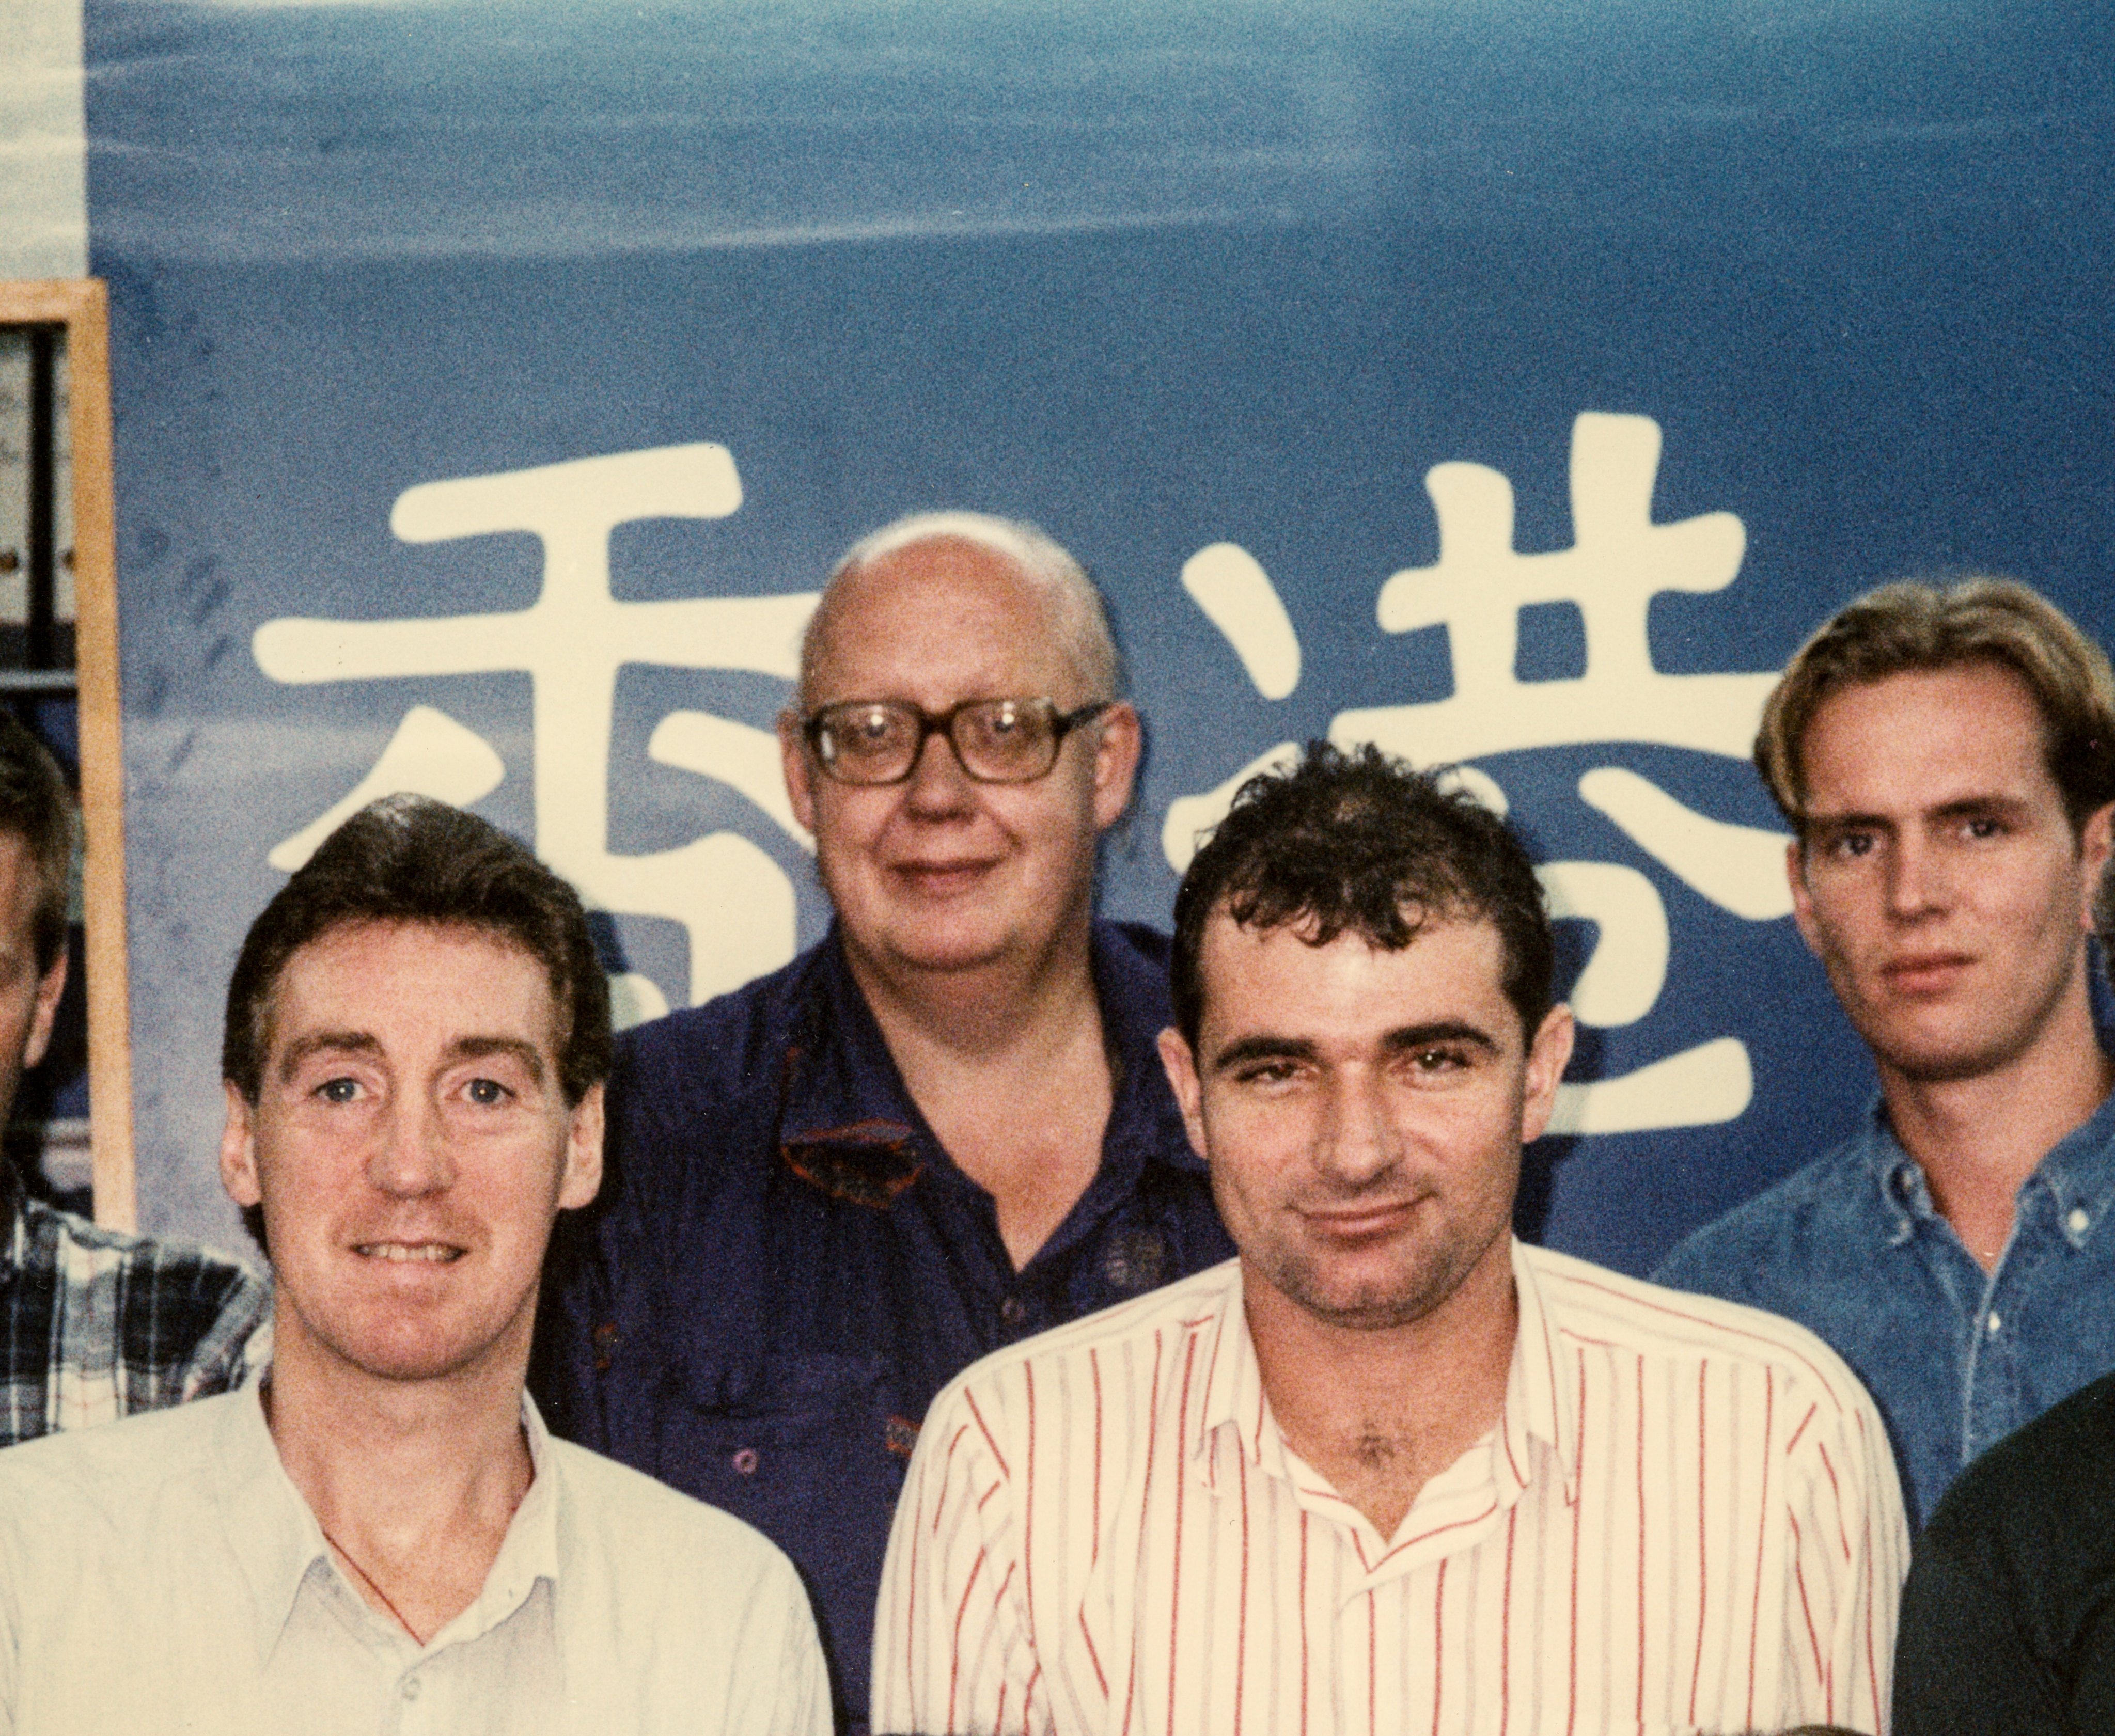 Keith Gibbs (with glasses) went missing on a Hong Kong trail in 1996, and his body was found 10 weeks later. Police were criticised for their lack of response to the missing-person report.